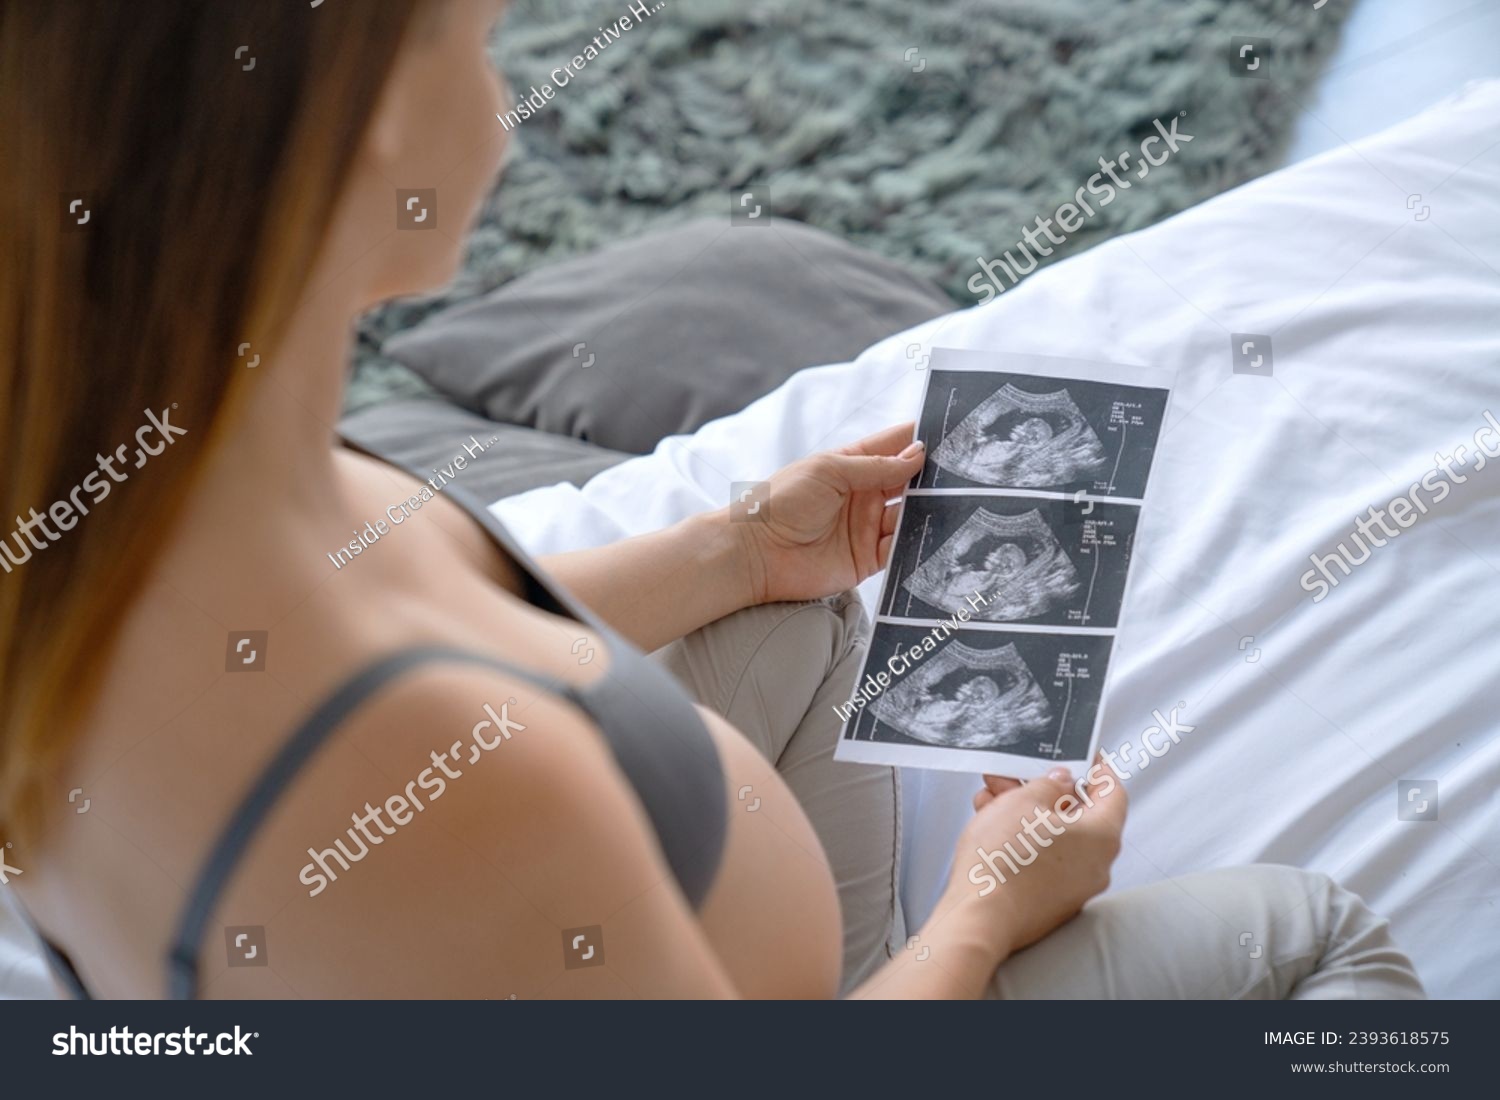 Pregnant woman looking at ultrasound scan of baby, close up of scan. X-ray image photo of fetus embryo. Expectant mother checking on medical document #2393618575